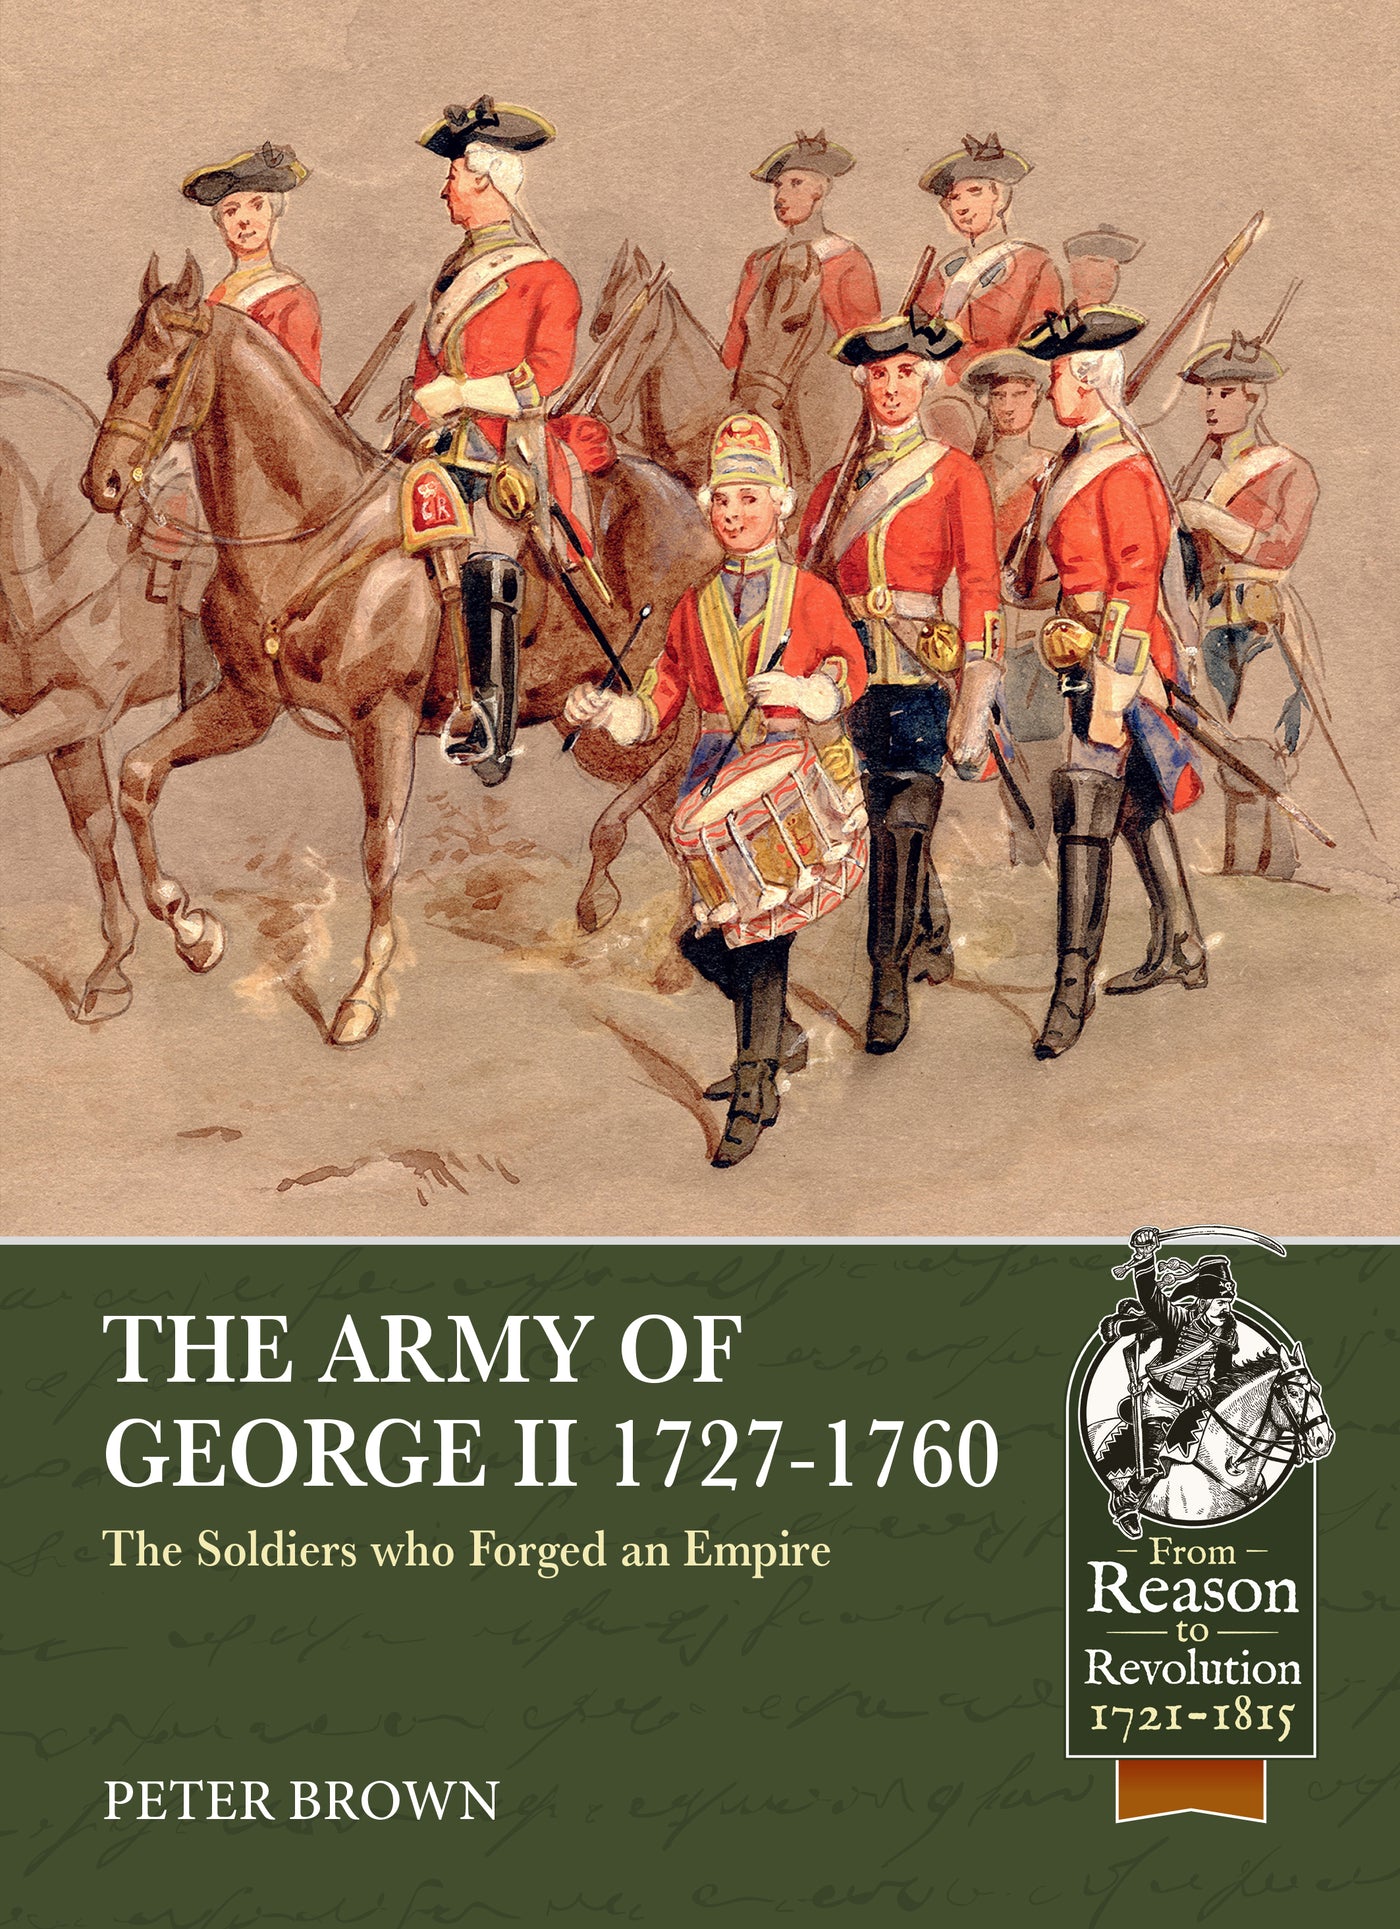 The Army of George II 1727-1760